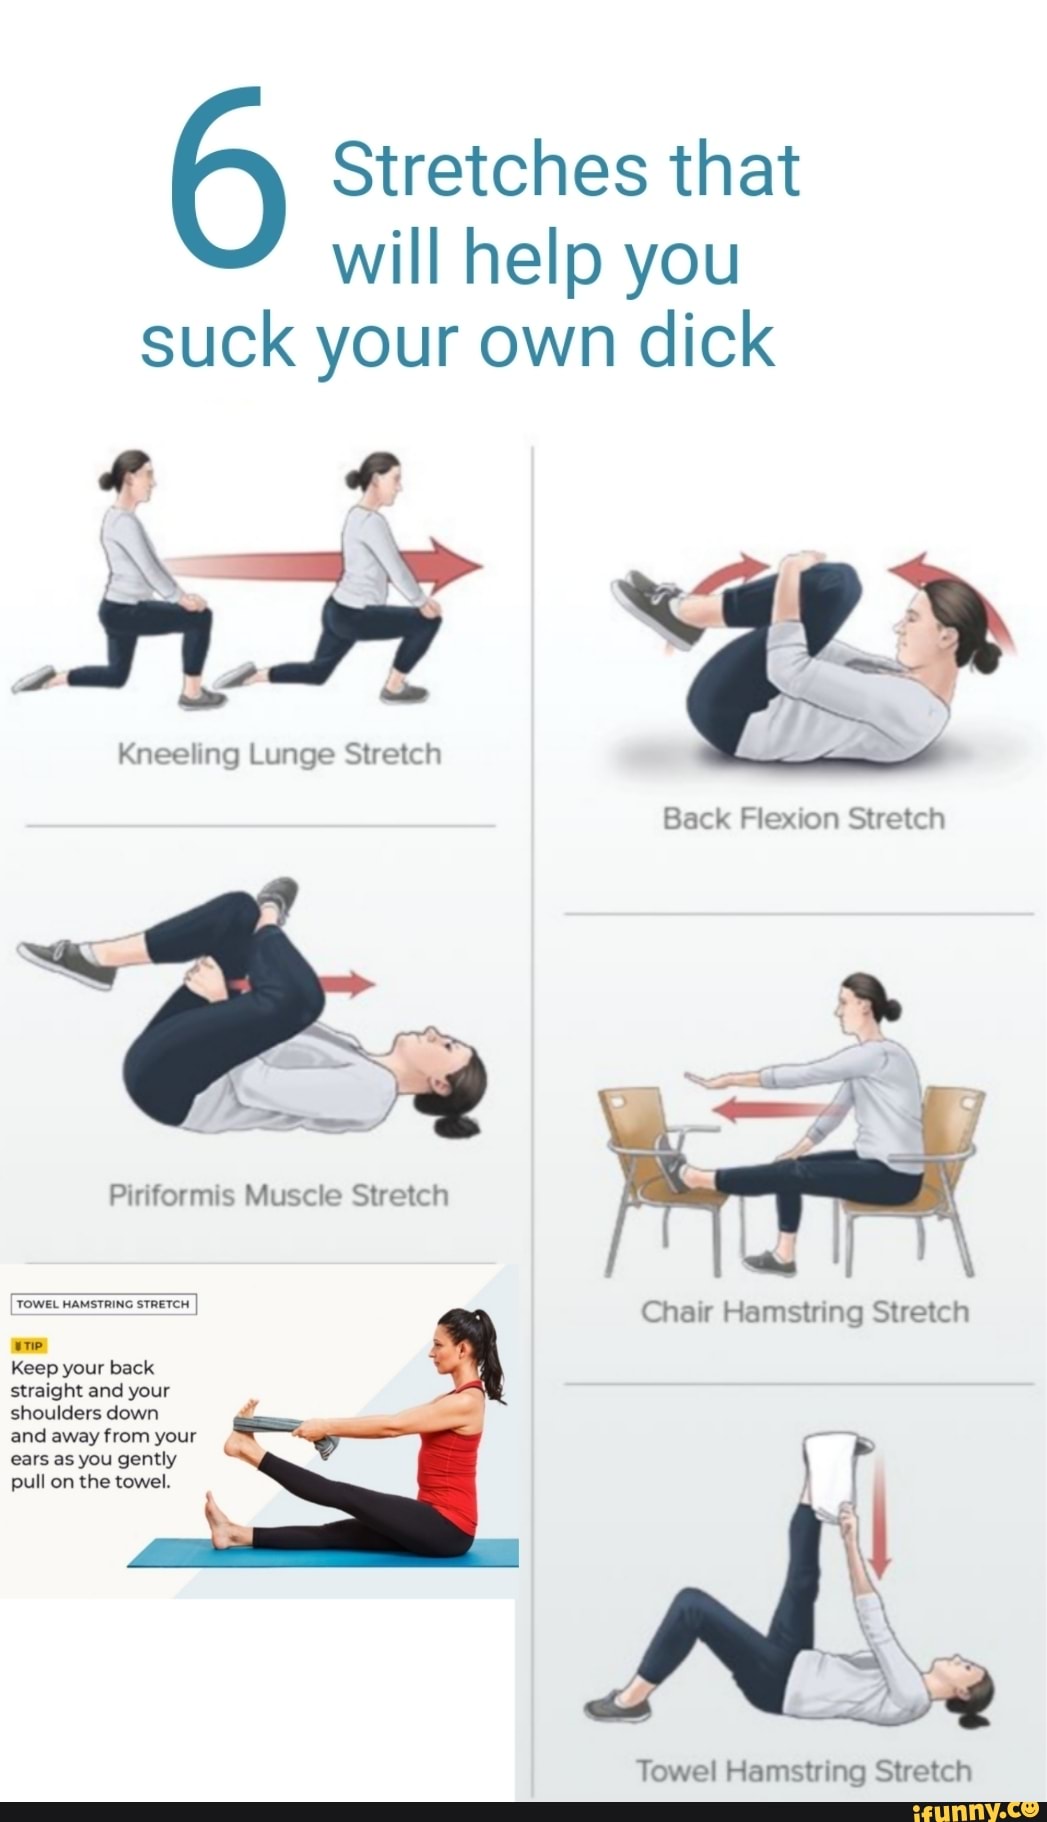 Penis stretching routine